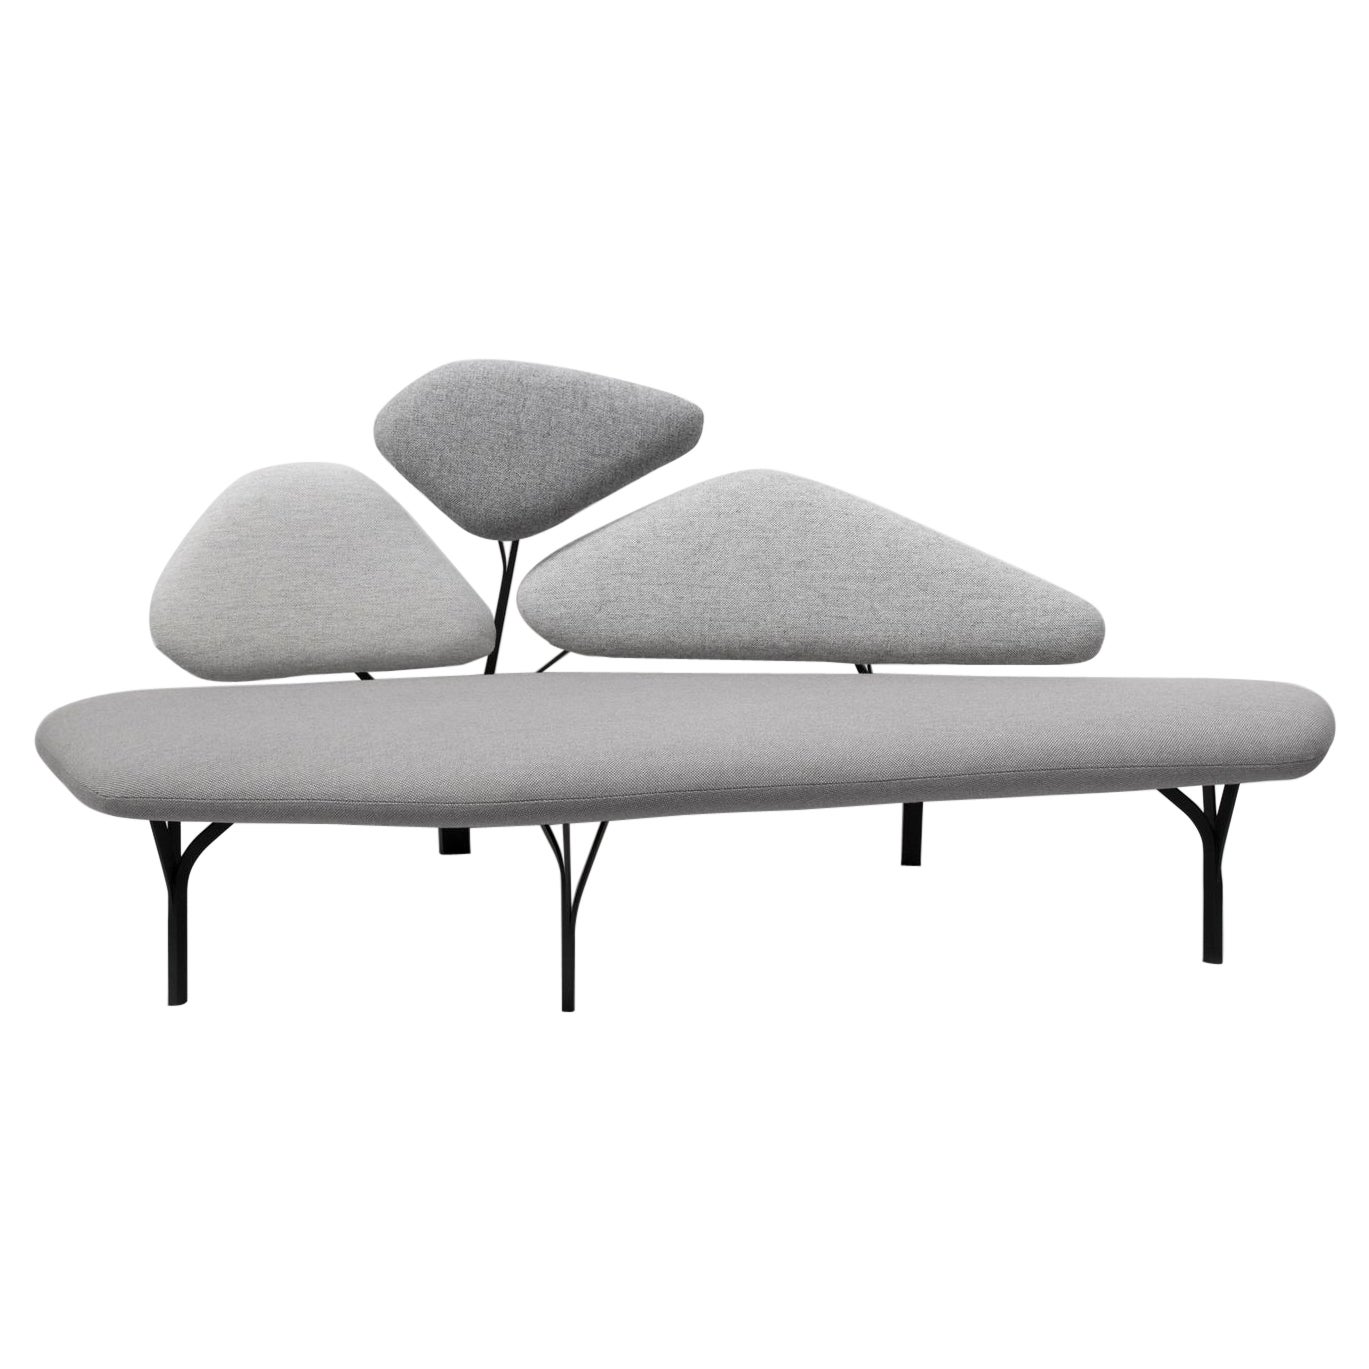 Borghese Grey Sofa Black Textured Structure By La Chance